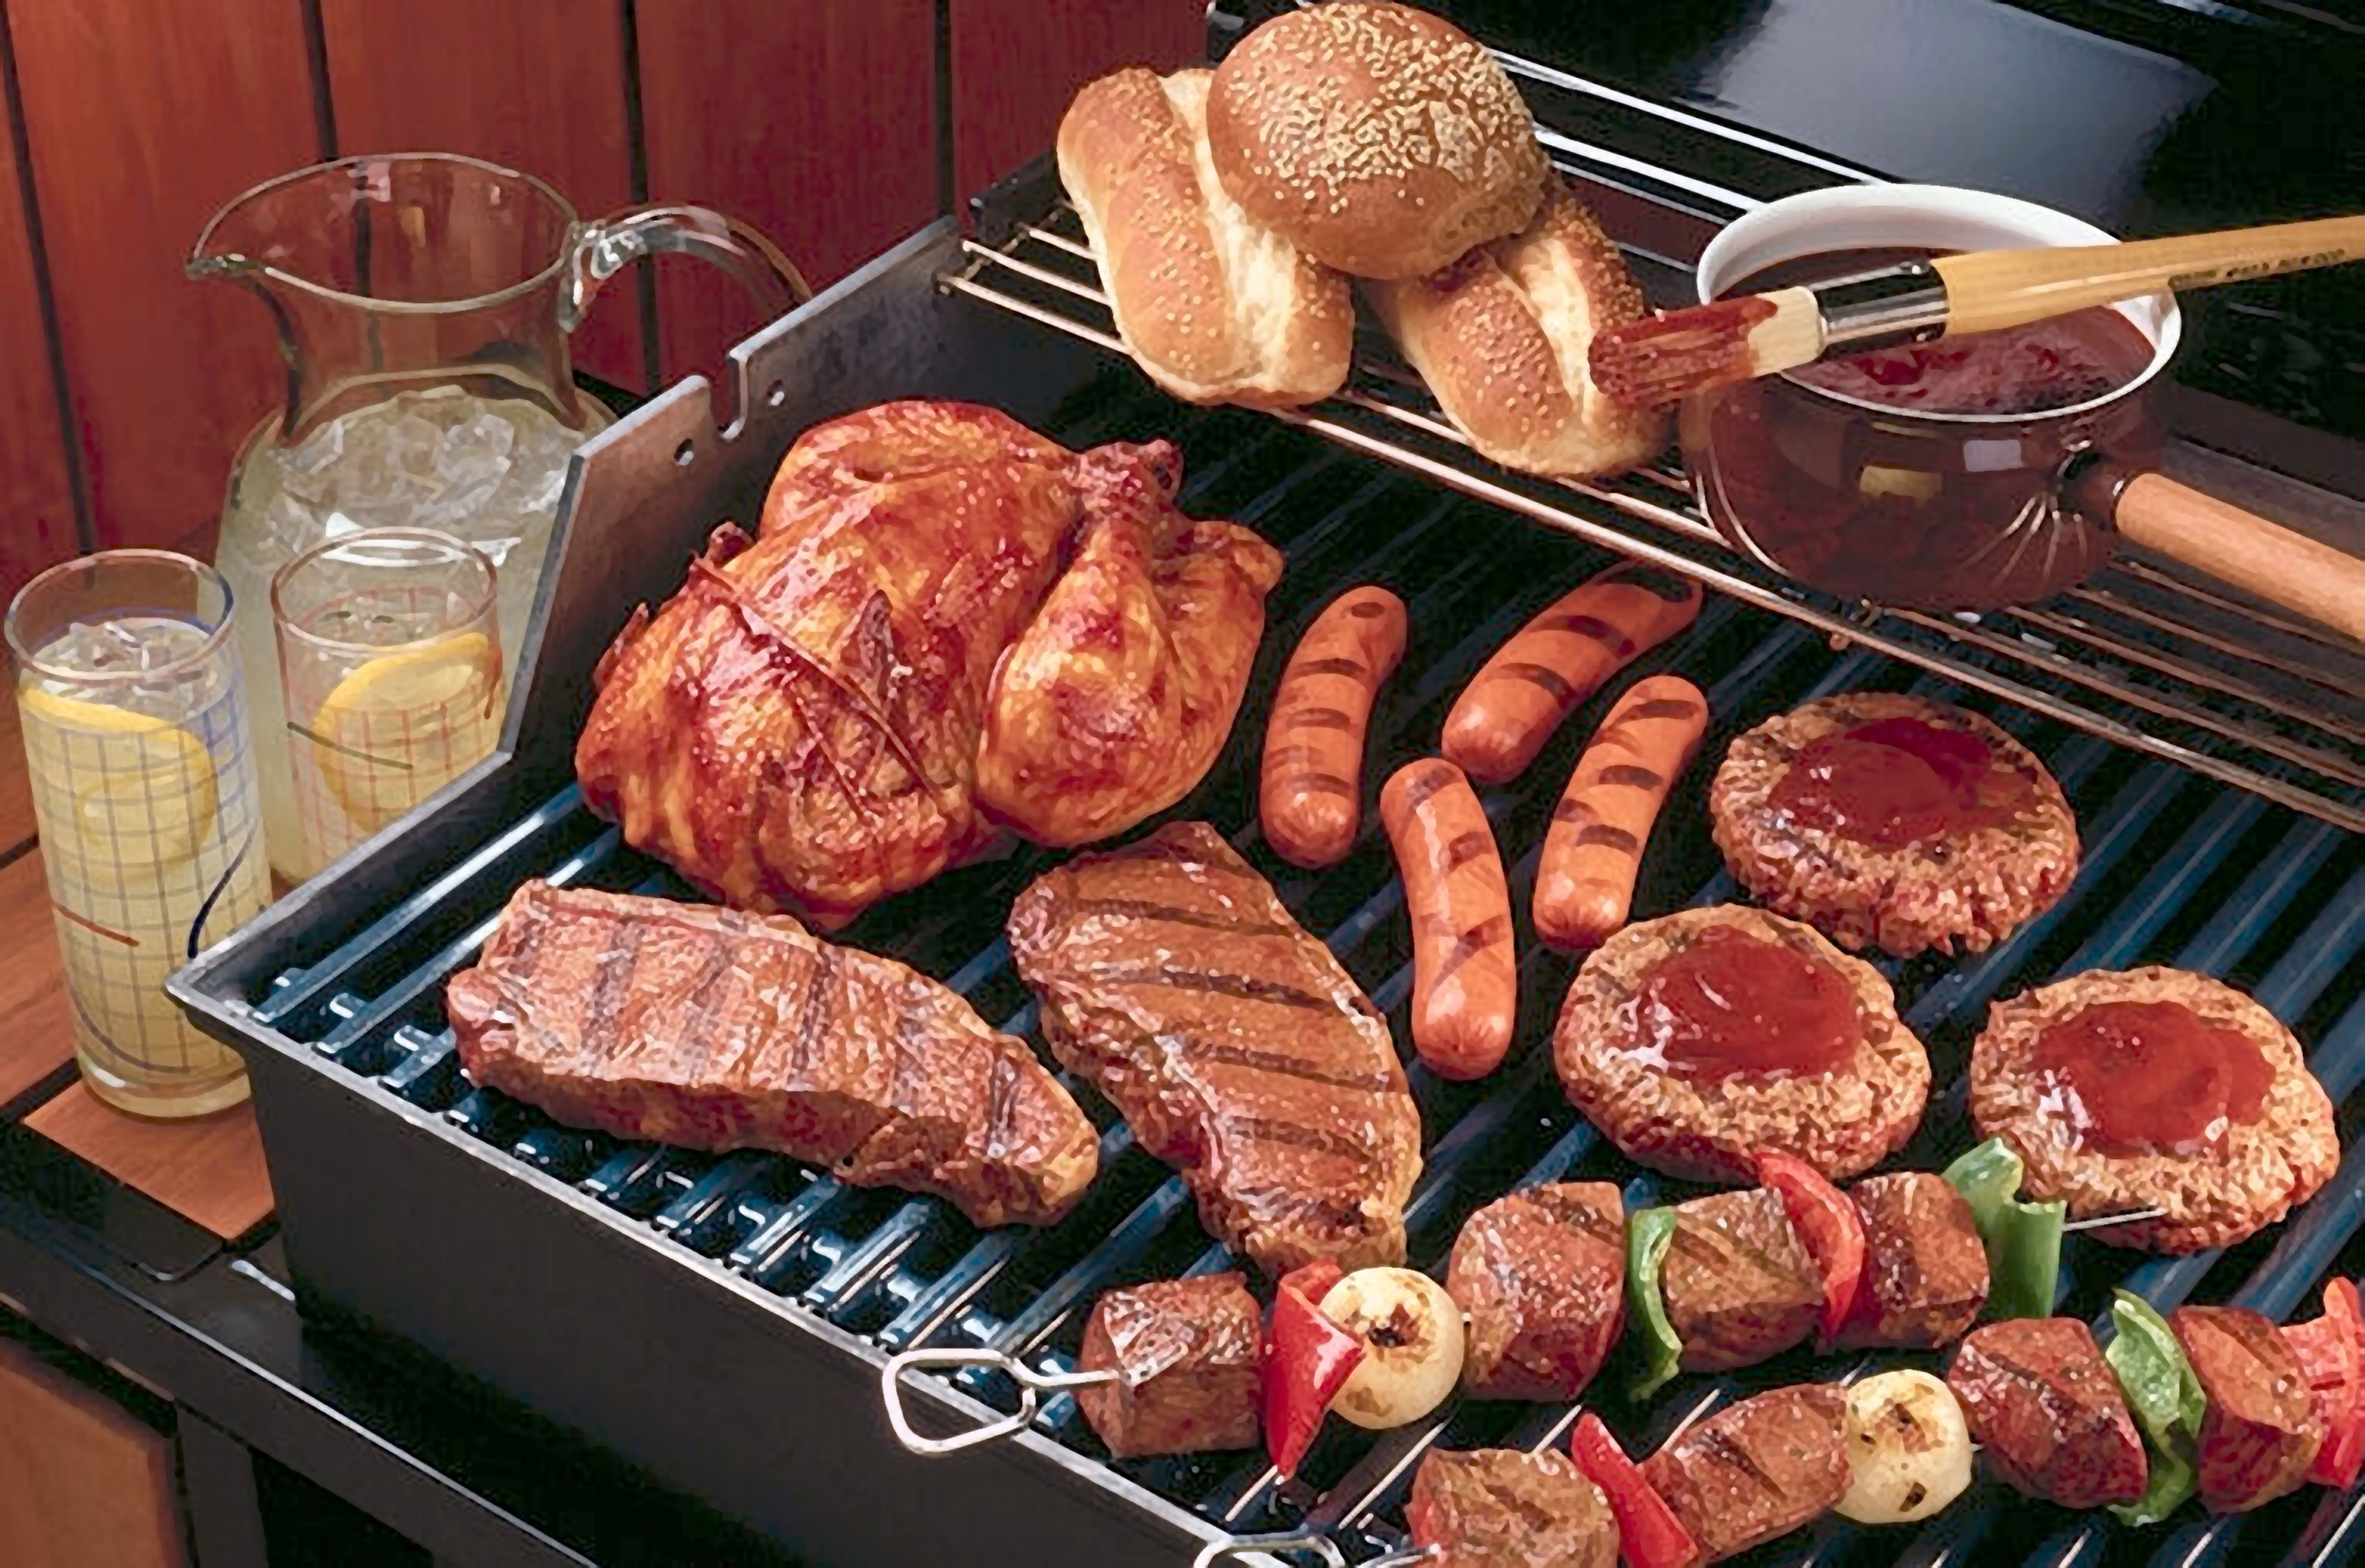 USDA Joins Grill Sergeants for Safe Grilling Advice